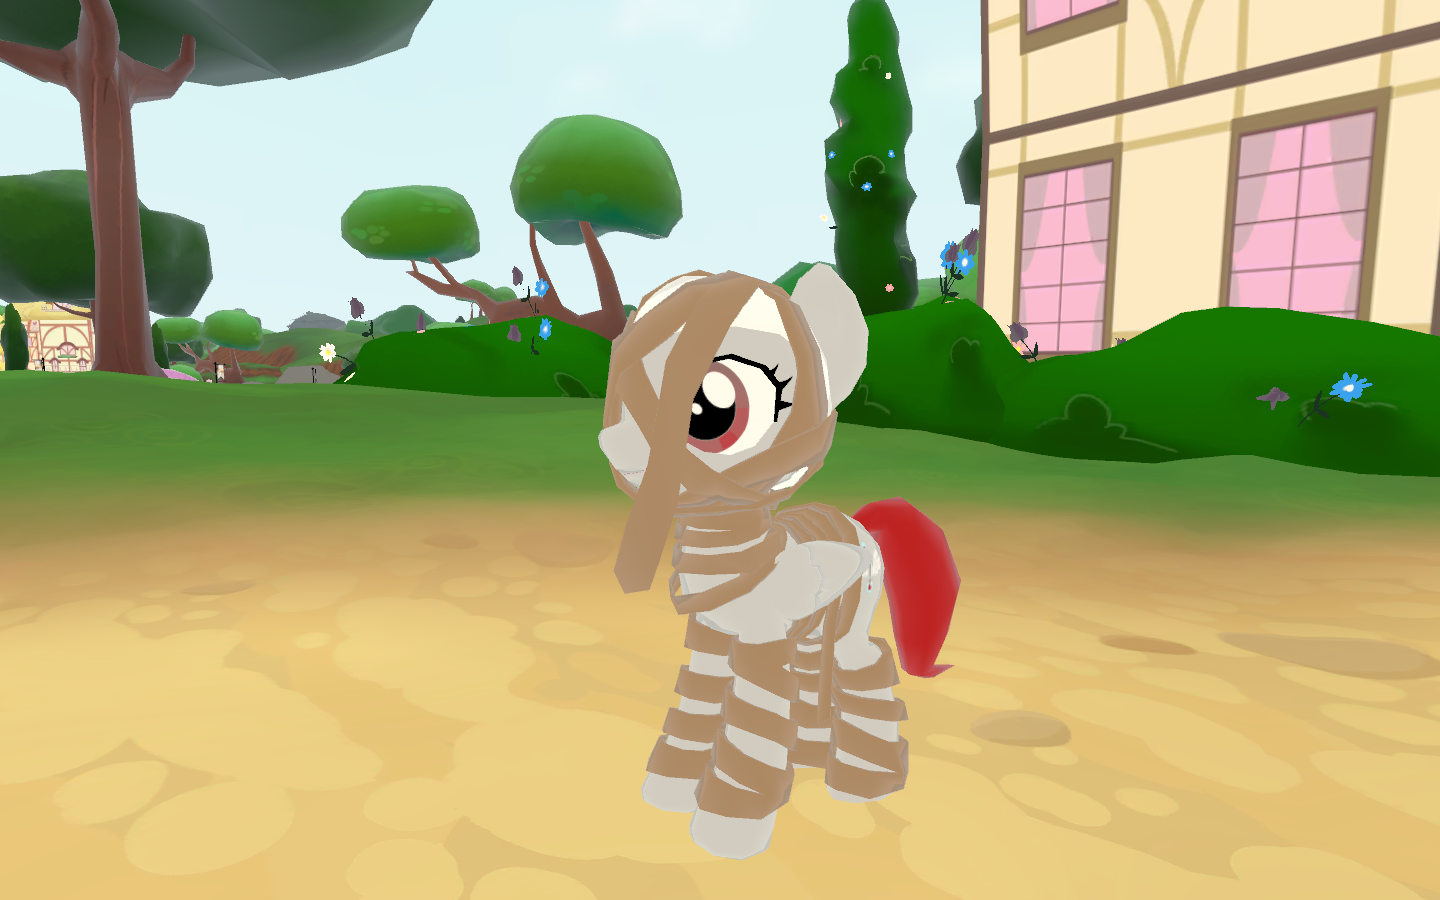 halloween legends of equestria 2020 Equestria Daily Mlp Stuff Legends Of Equestria Halloween Update Live Costumes Locations Decor And More Added halloween legends of equestria 2020